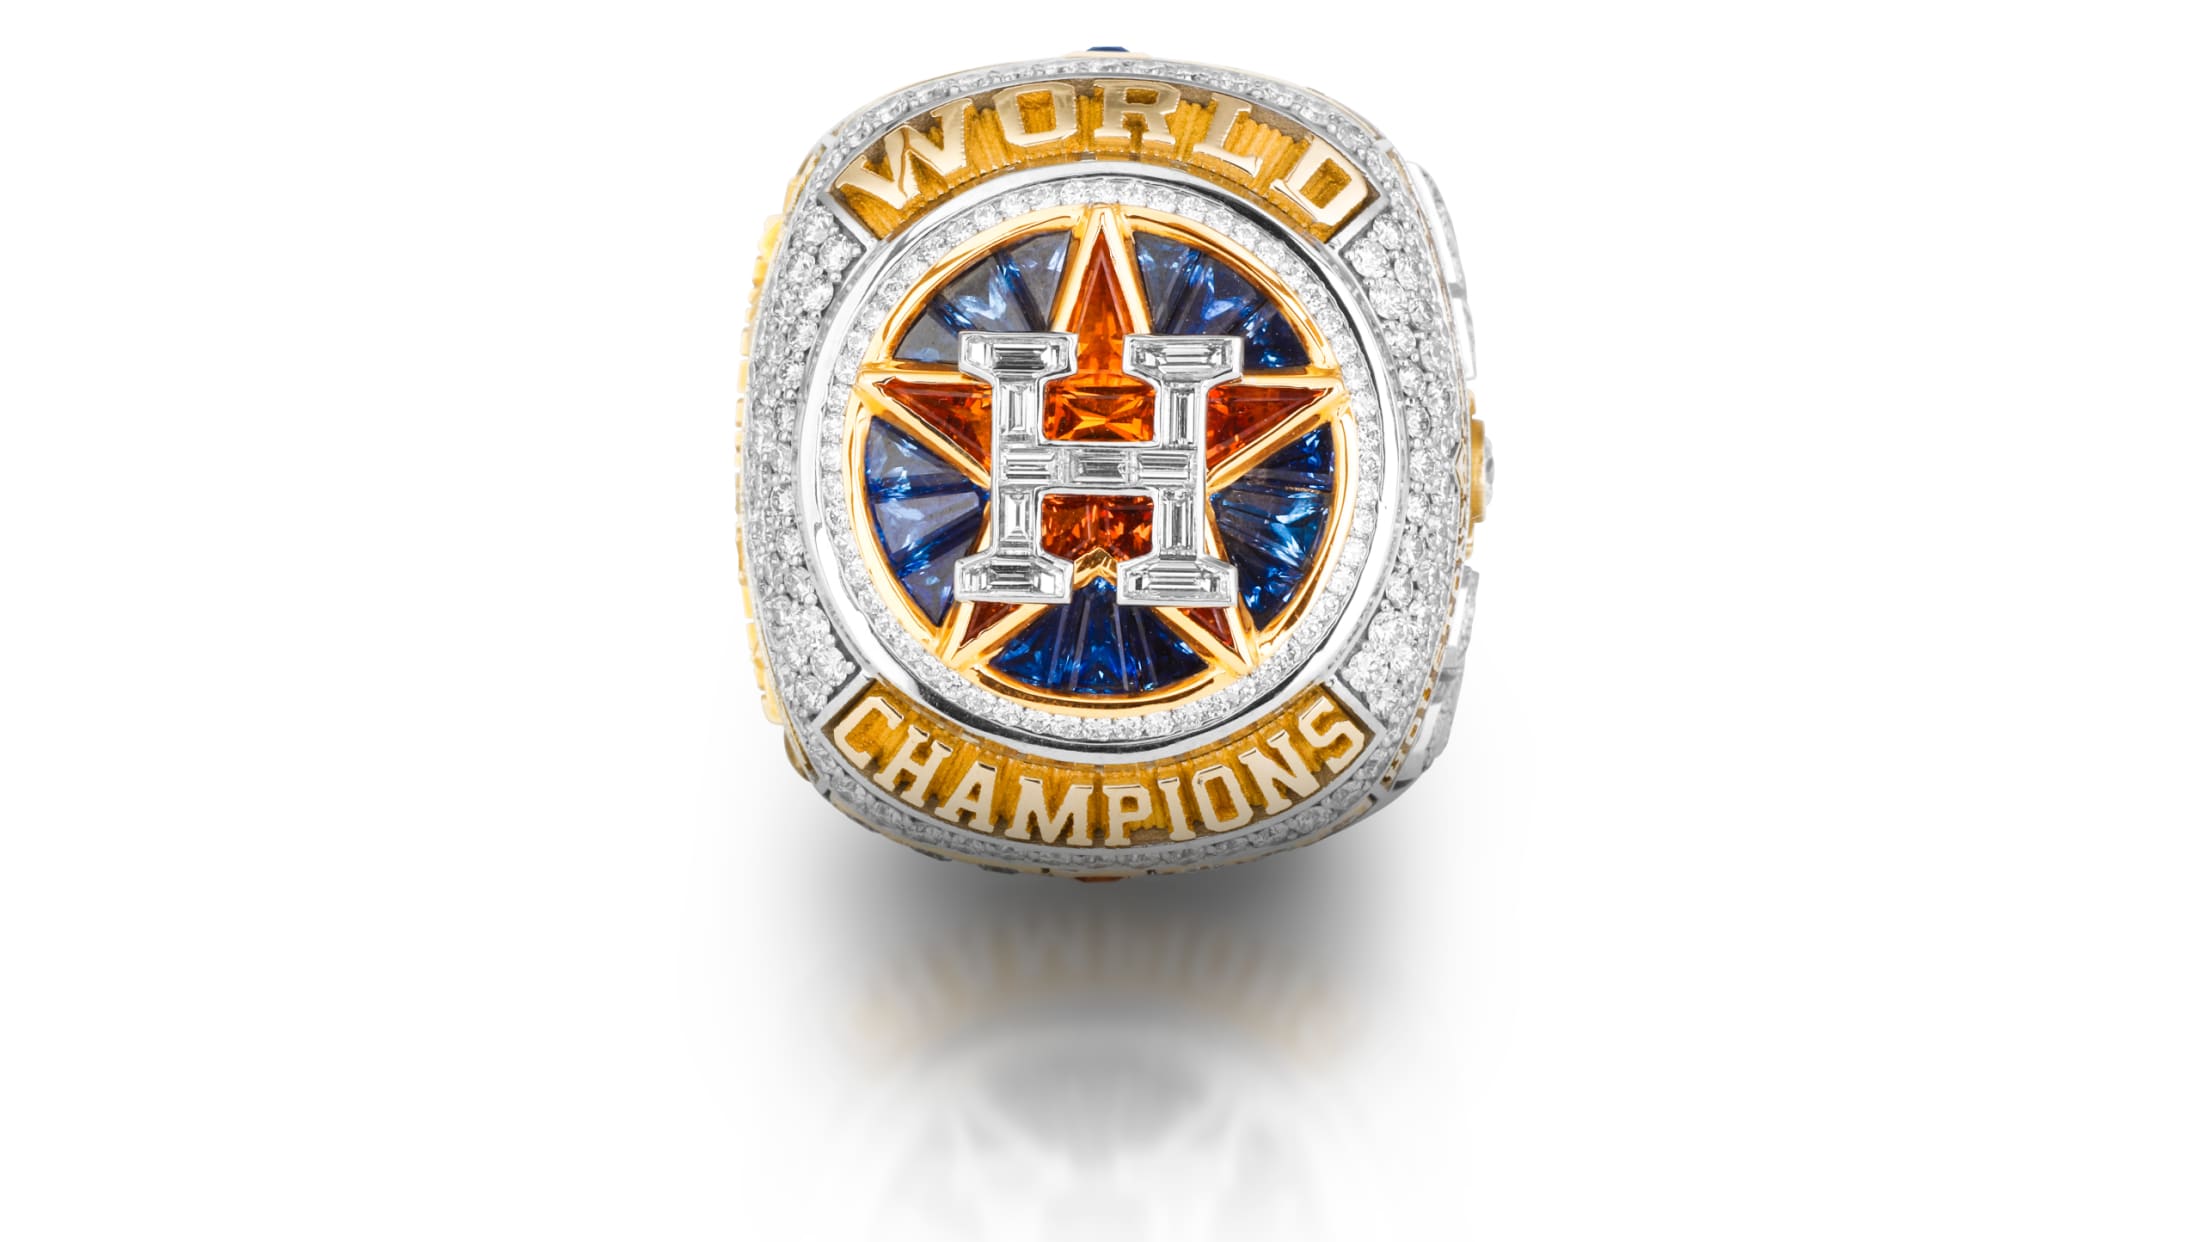 2017 World Series Champions: Houston Astros - Where to Watch and